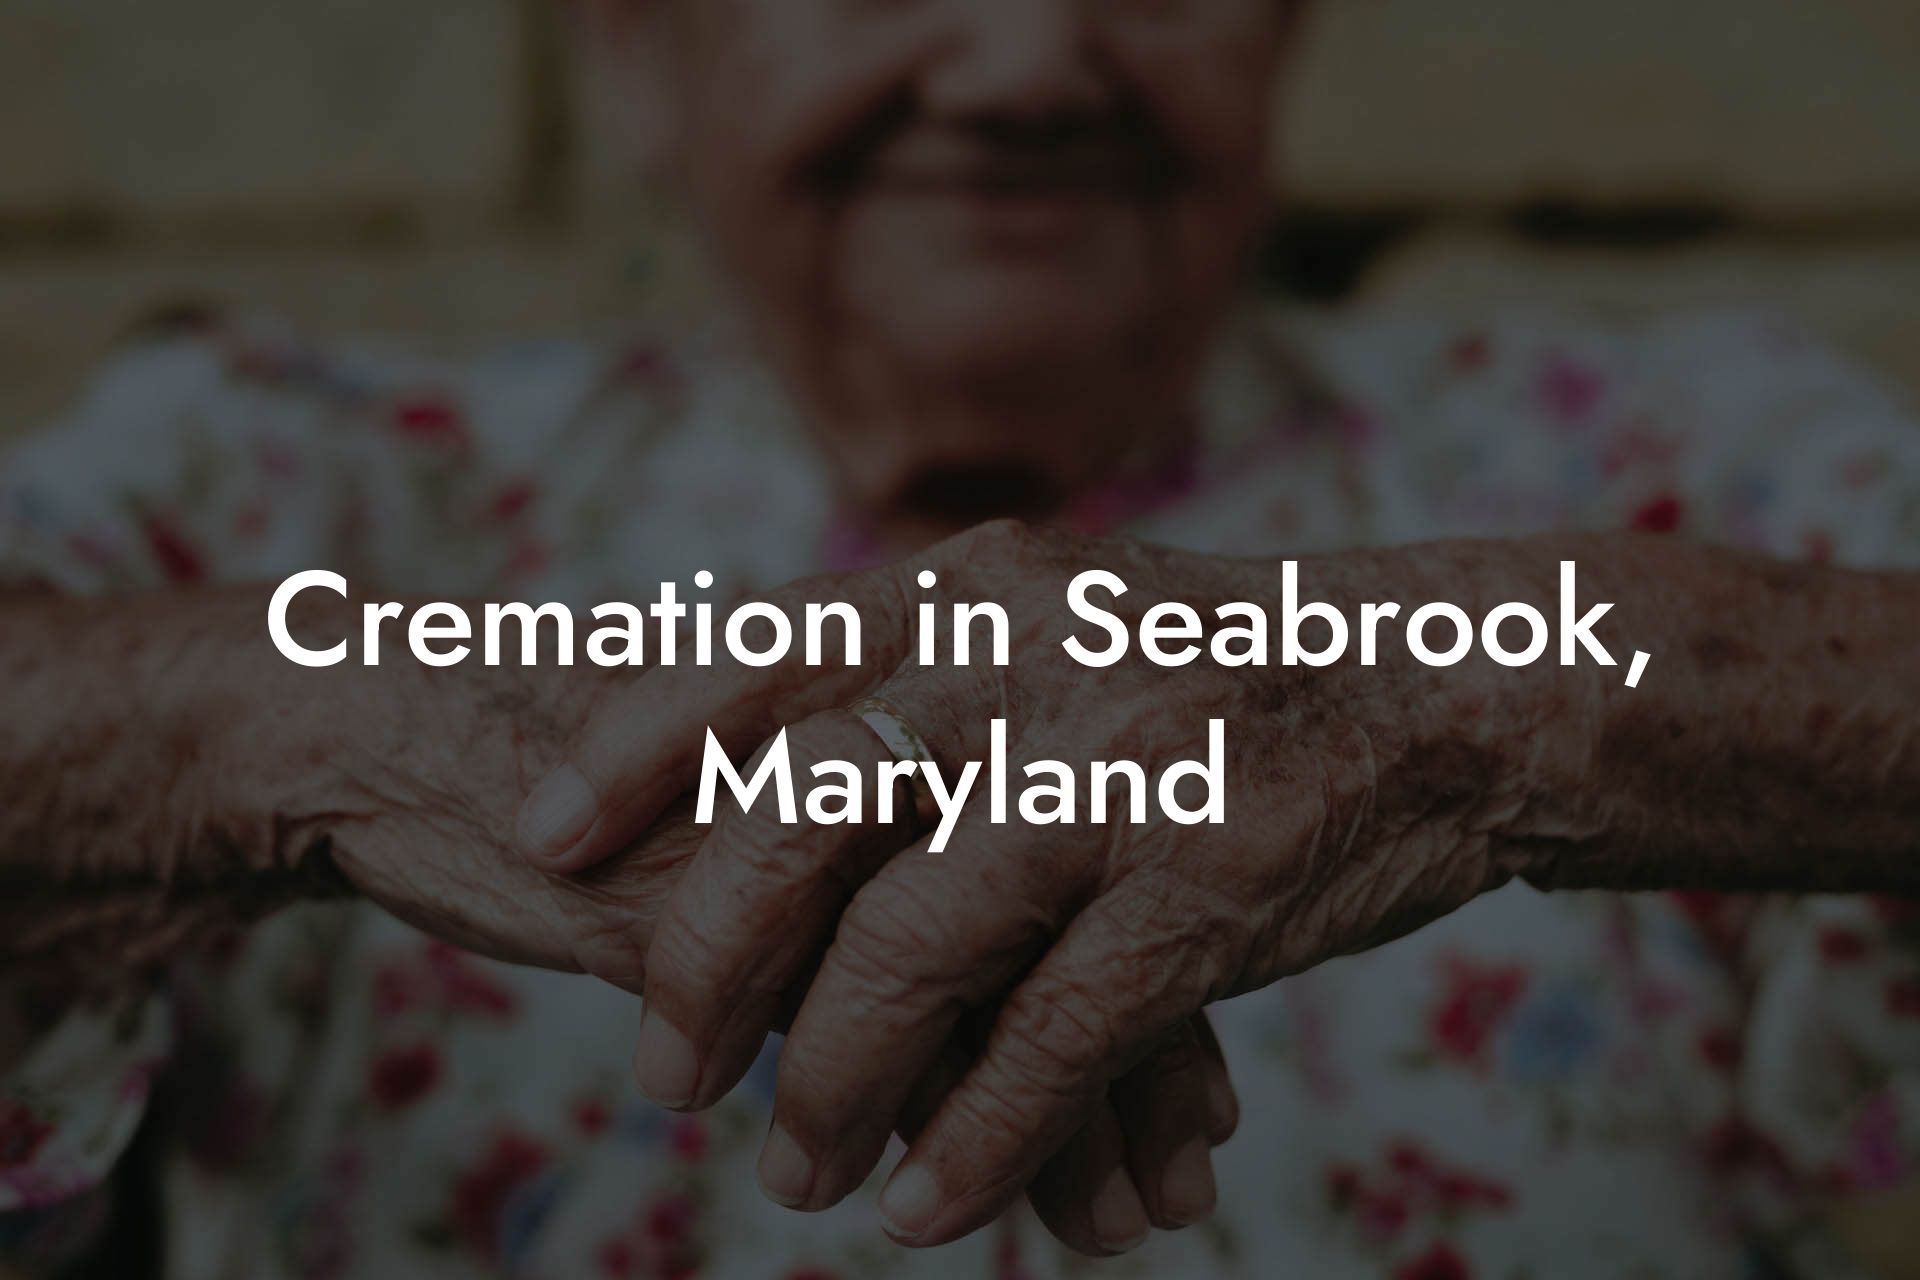 Cremation in Seabrook, Maryland